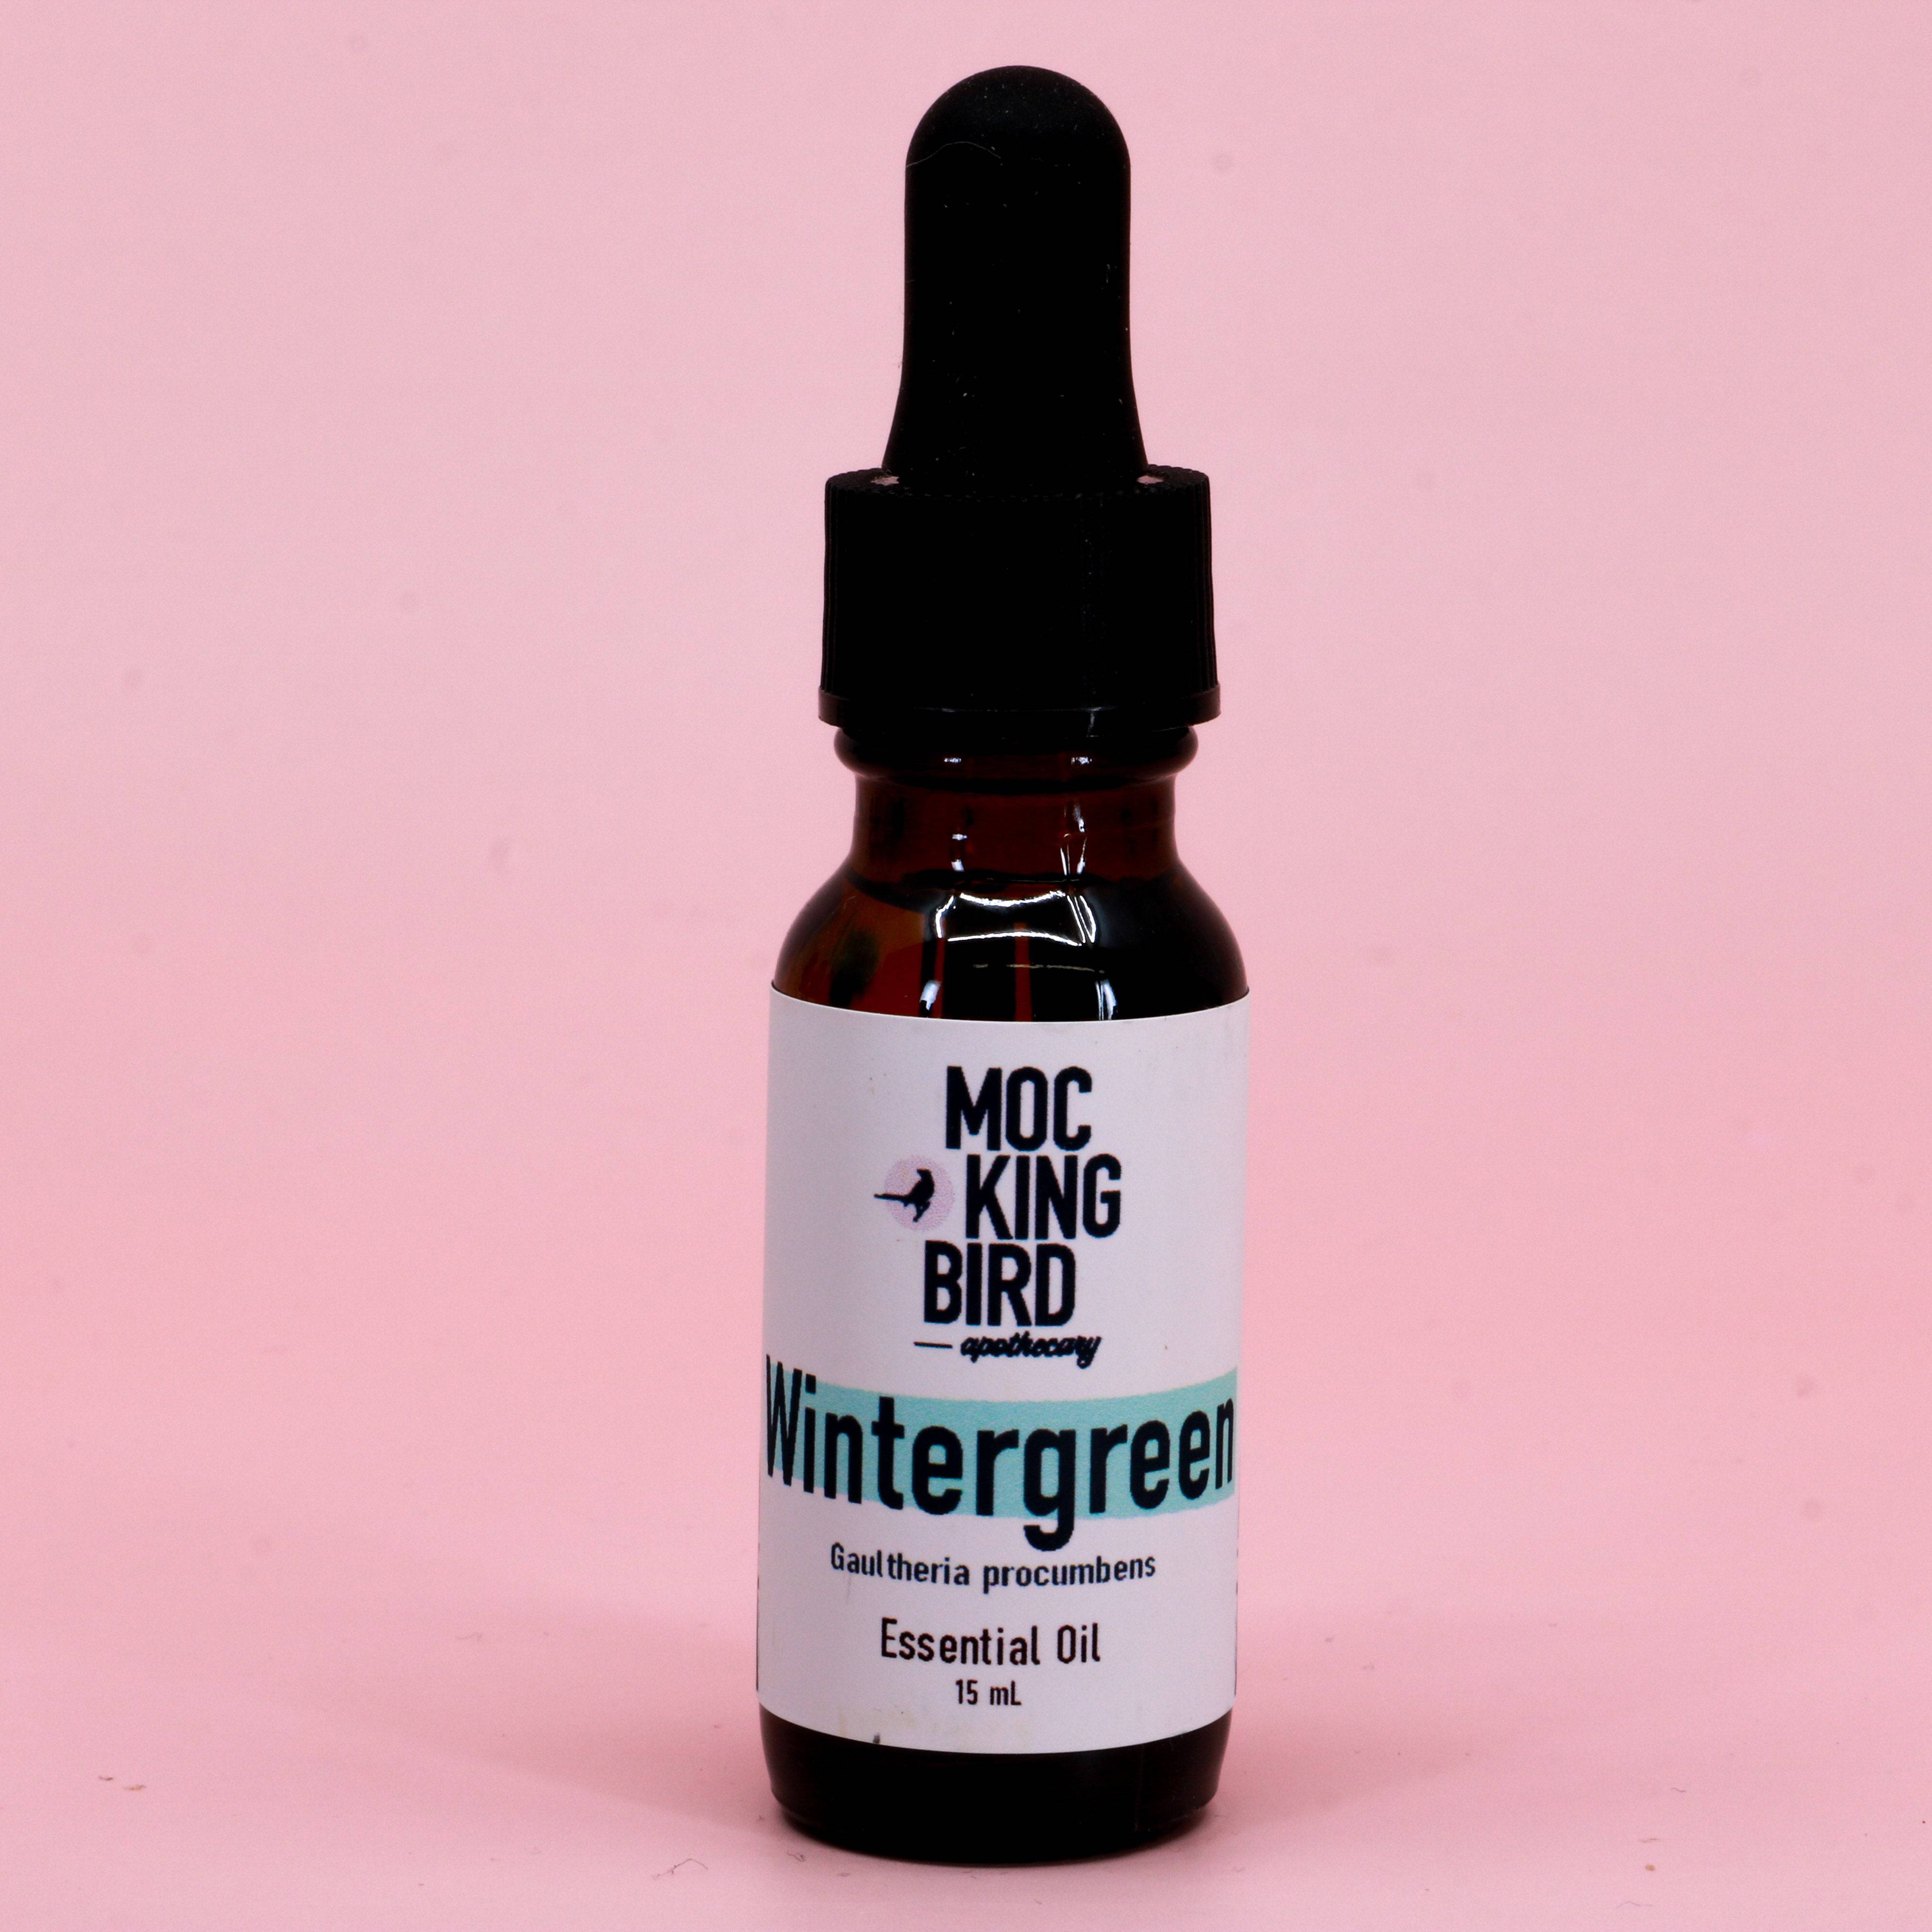 Wintergreen Essential Oil (Gaultheria procumbens) - The Mockingbird Apothecary & General Store